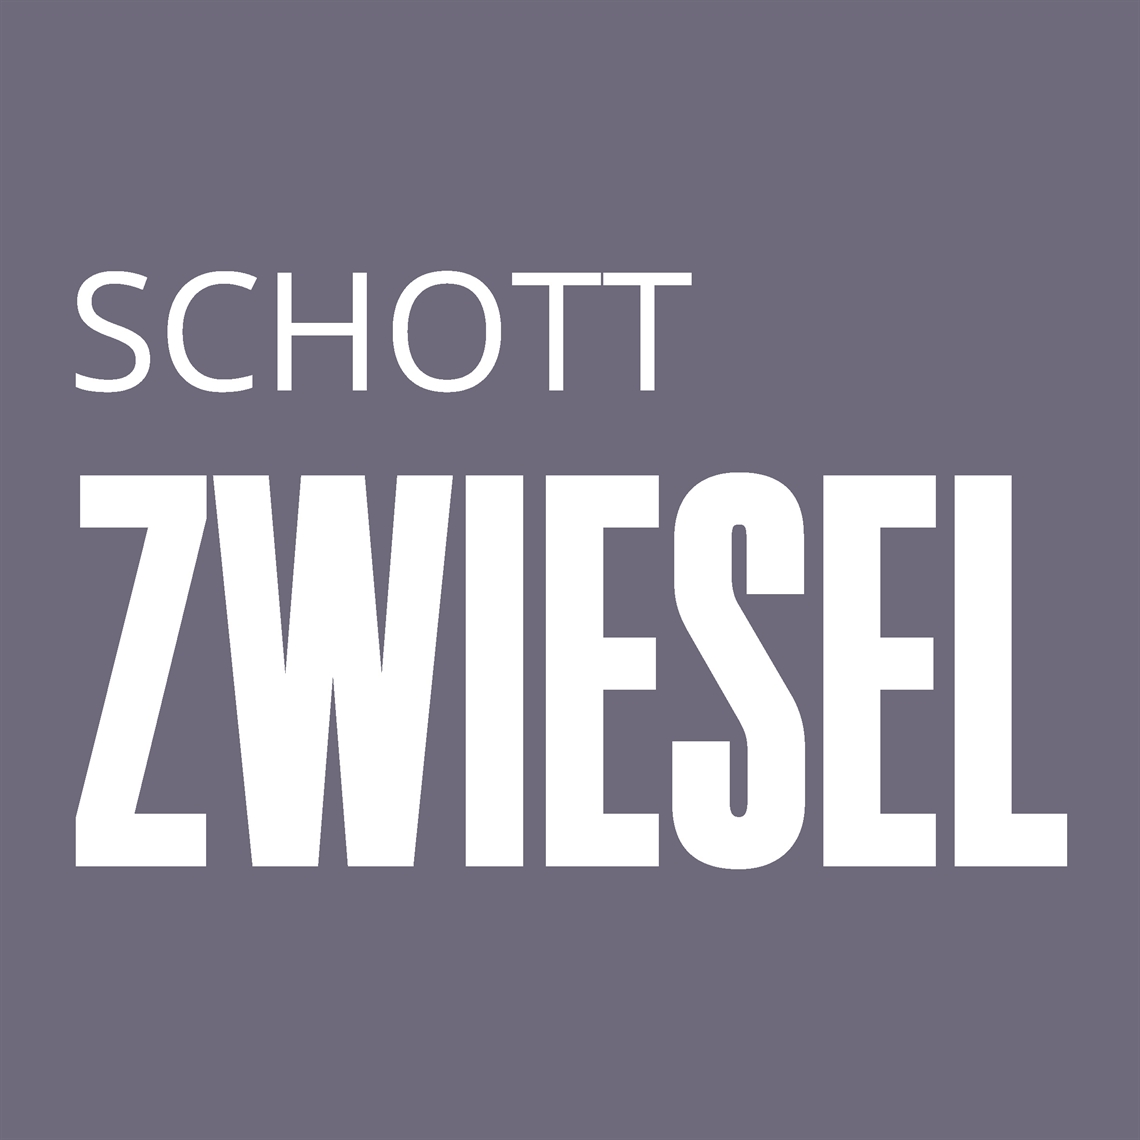 View our collection of Schott Zwiesel Stemmed vs. Stemless wine glasses